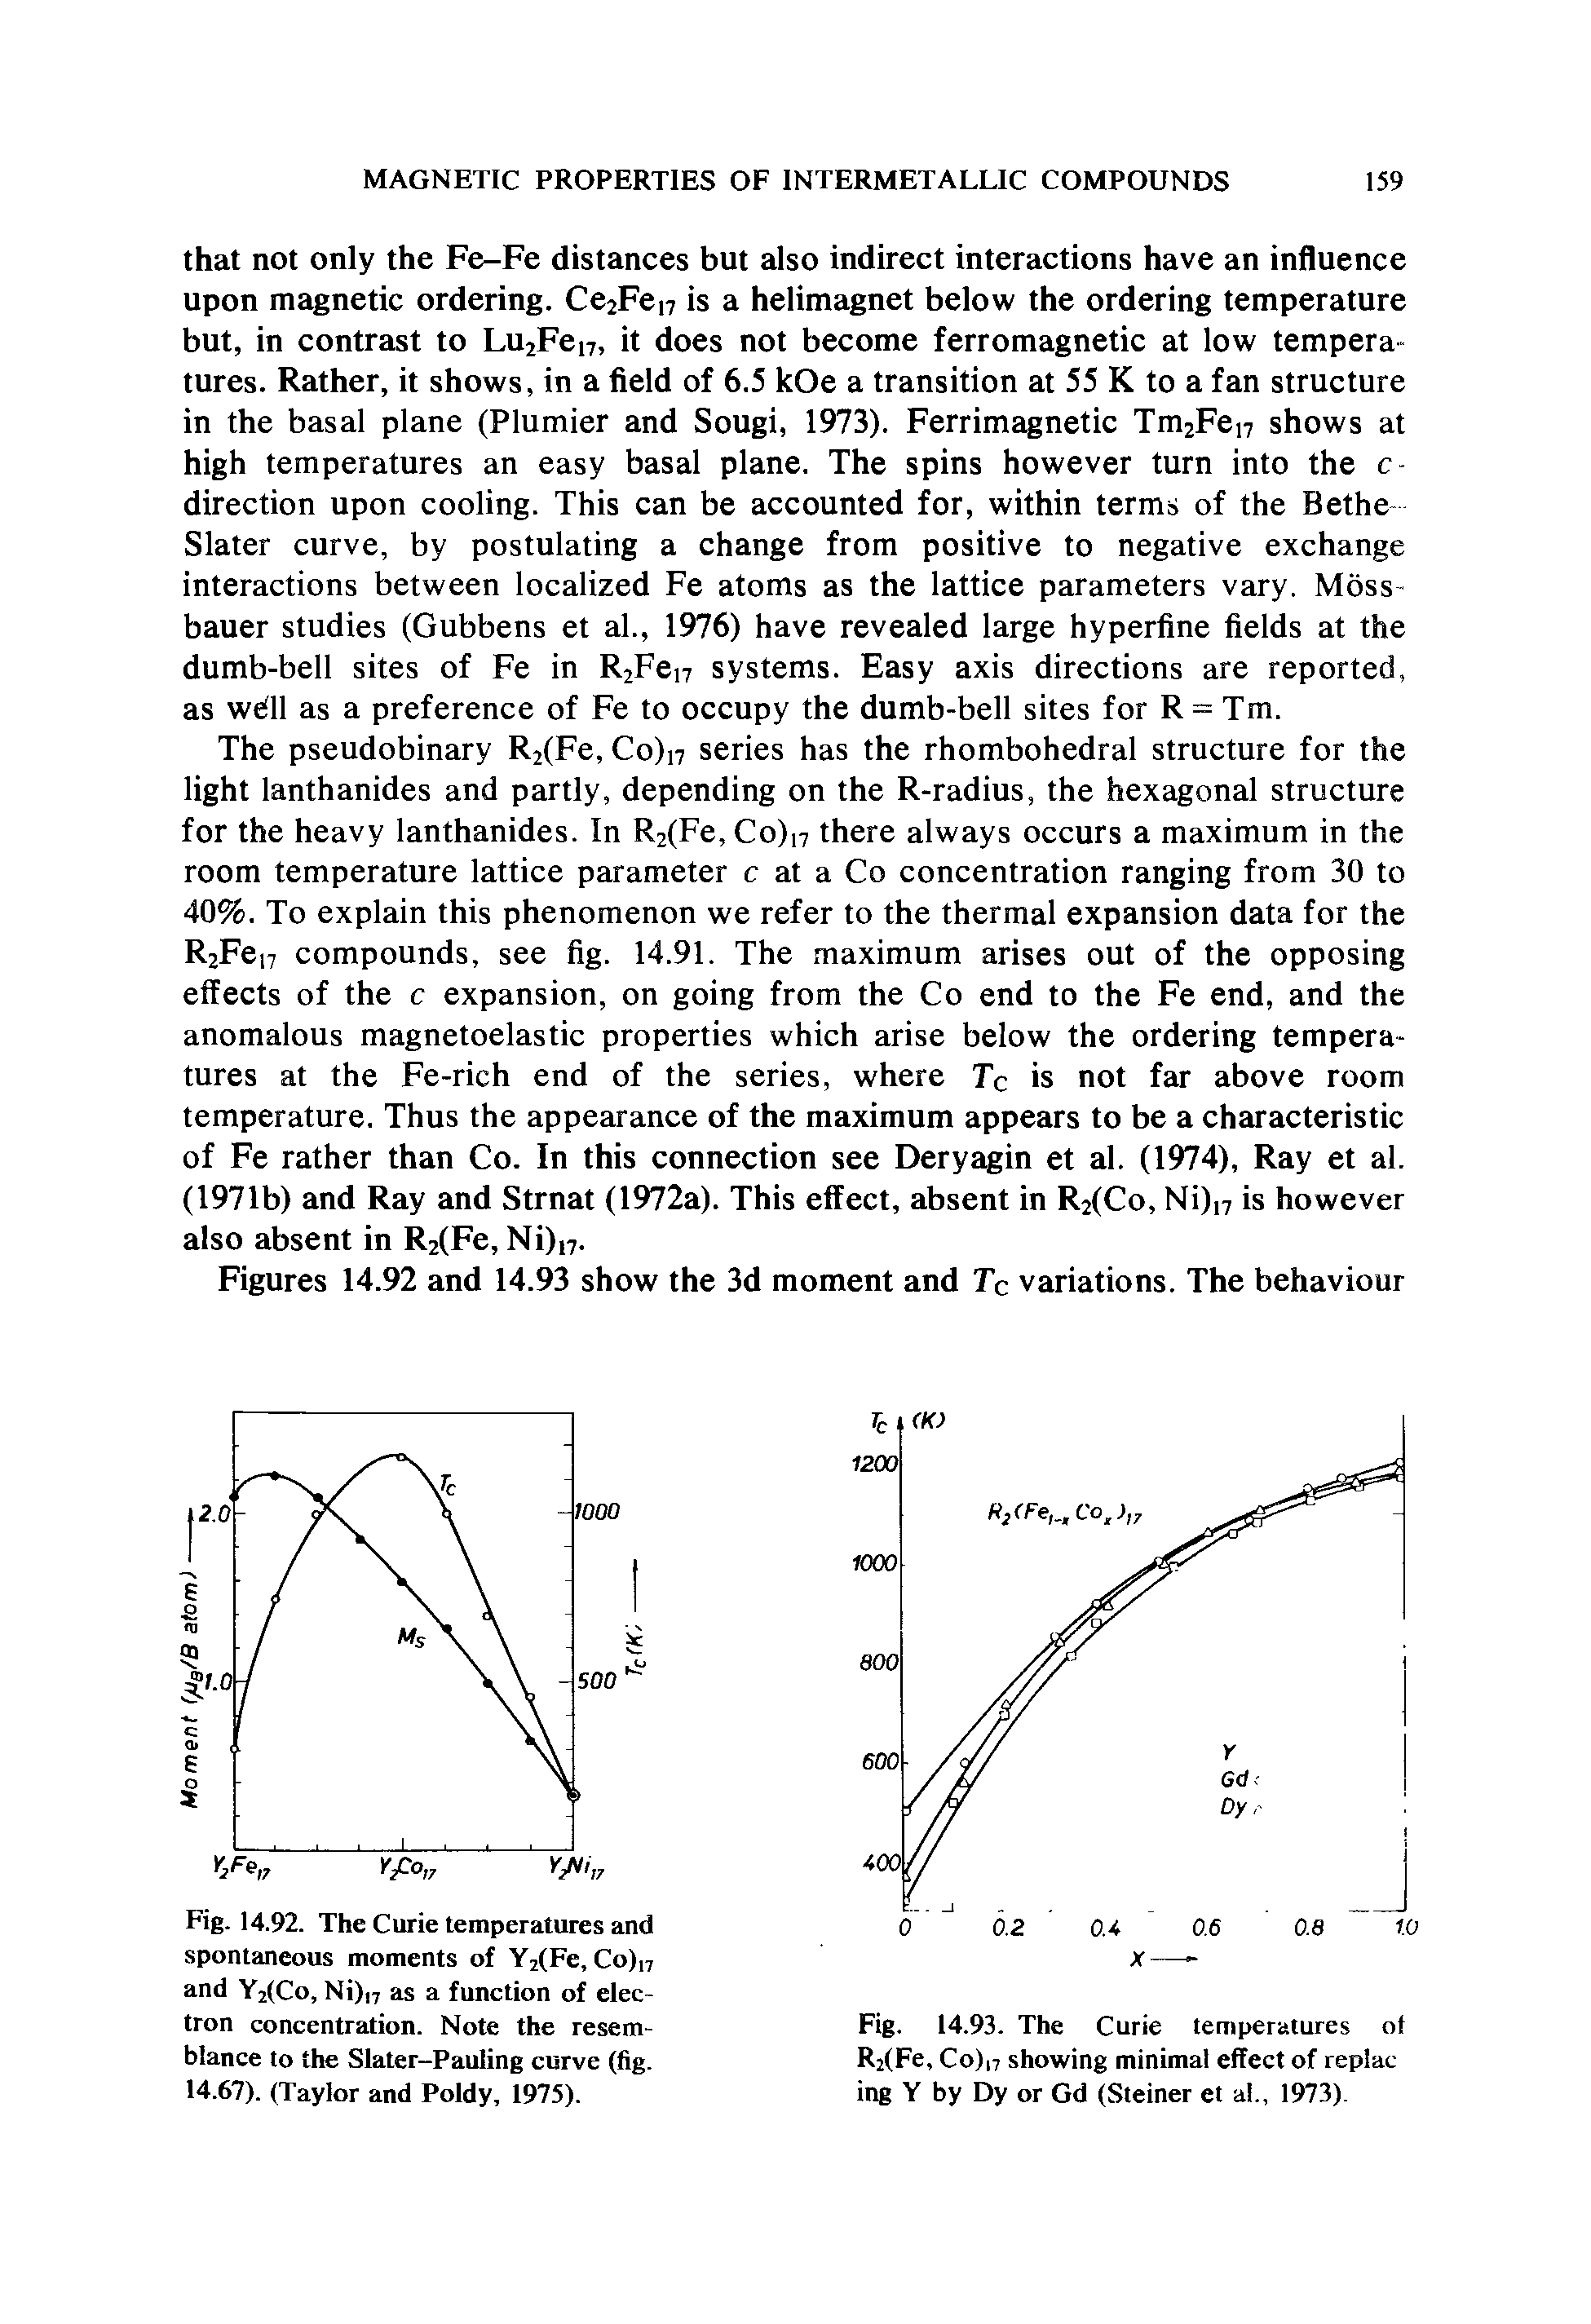 Fig. 14.92. The Curie temperatures and spontaneous moments of Y2(Fe, Co)n and Y2(Co, Ni)i7 as a function of electron concentration. Note the resemblance to the Slater-Pauling curve (fig. 14.67). (Taylor and Poldy, 1975).